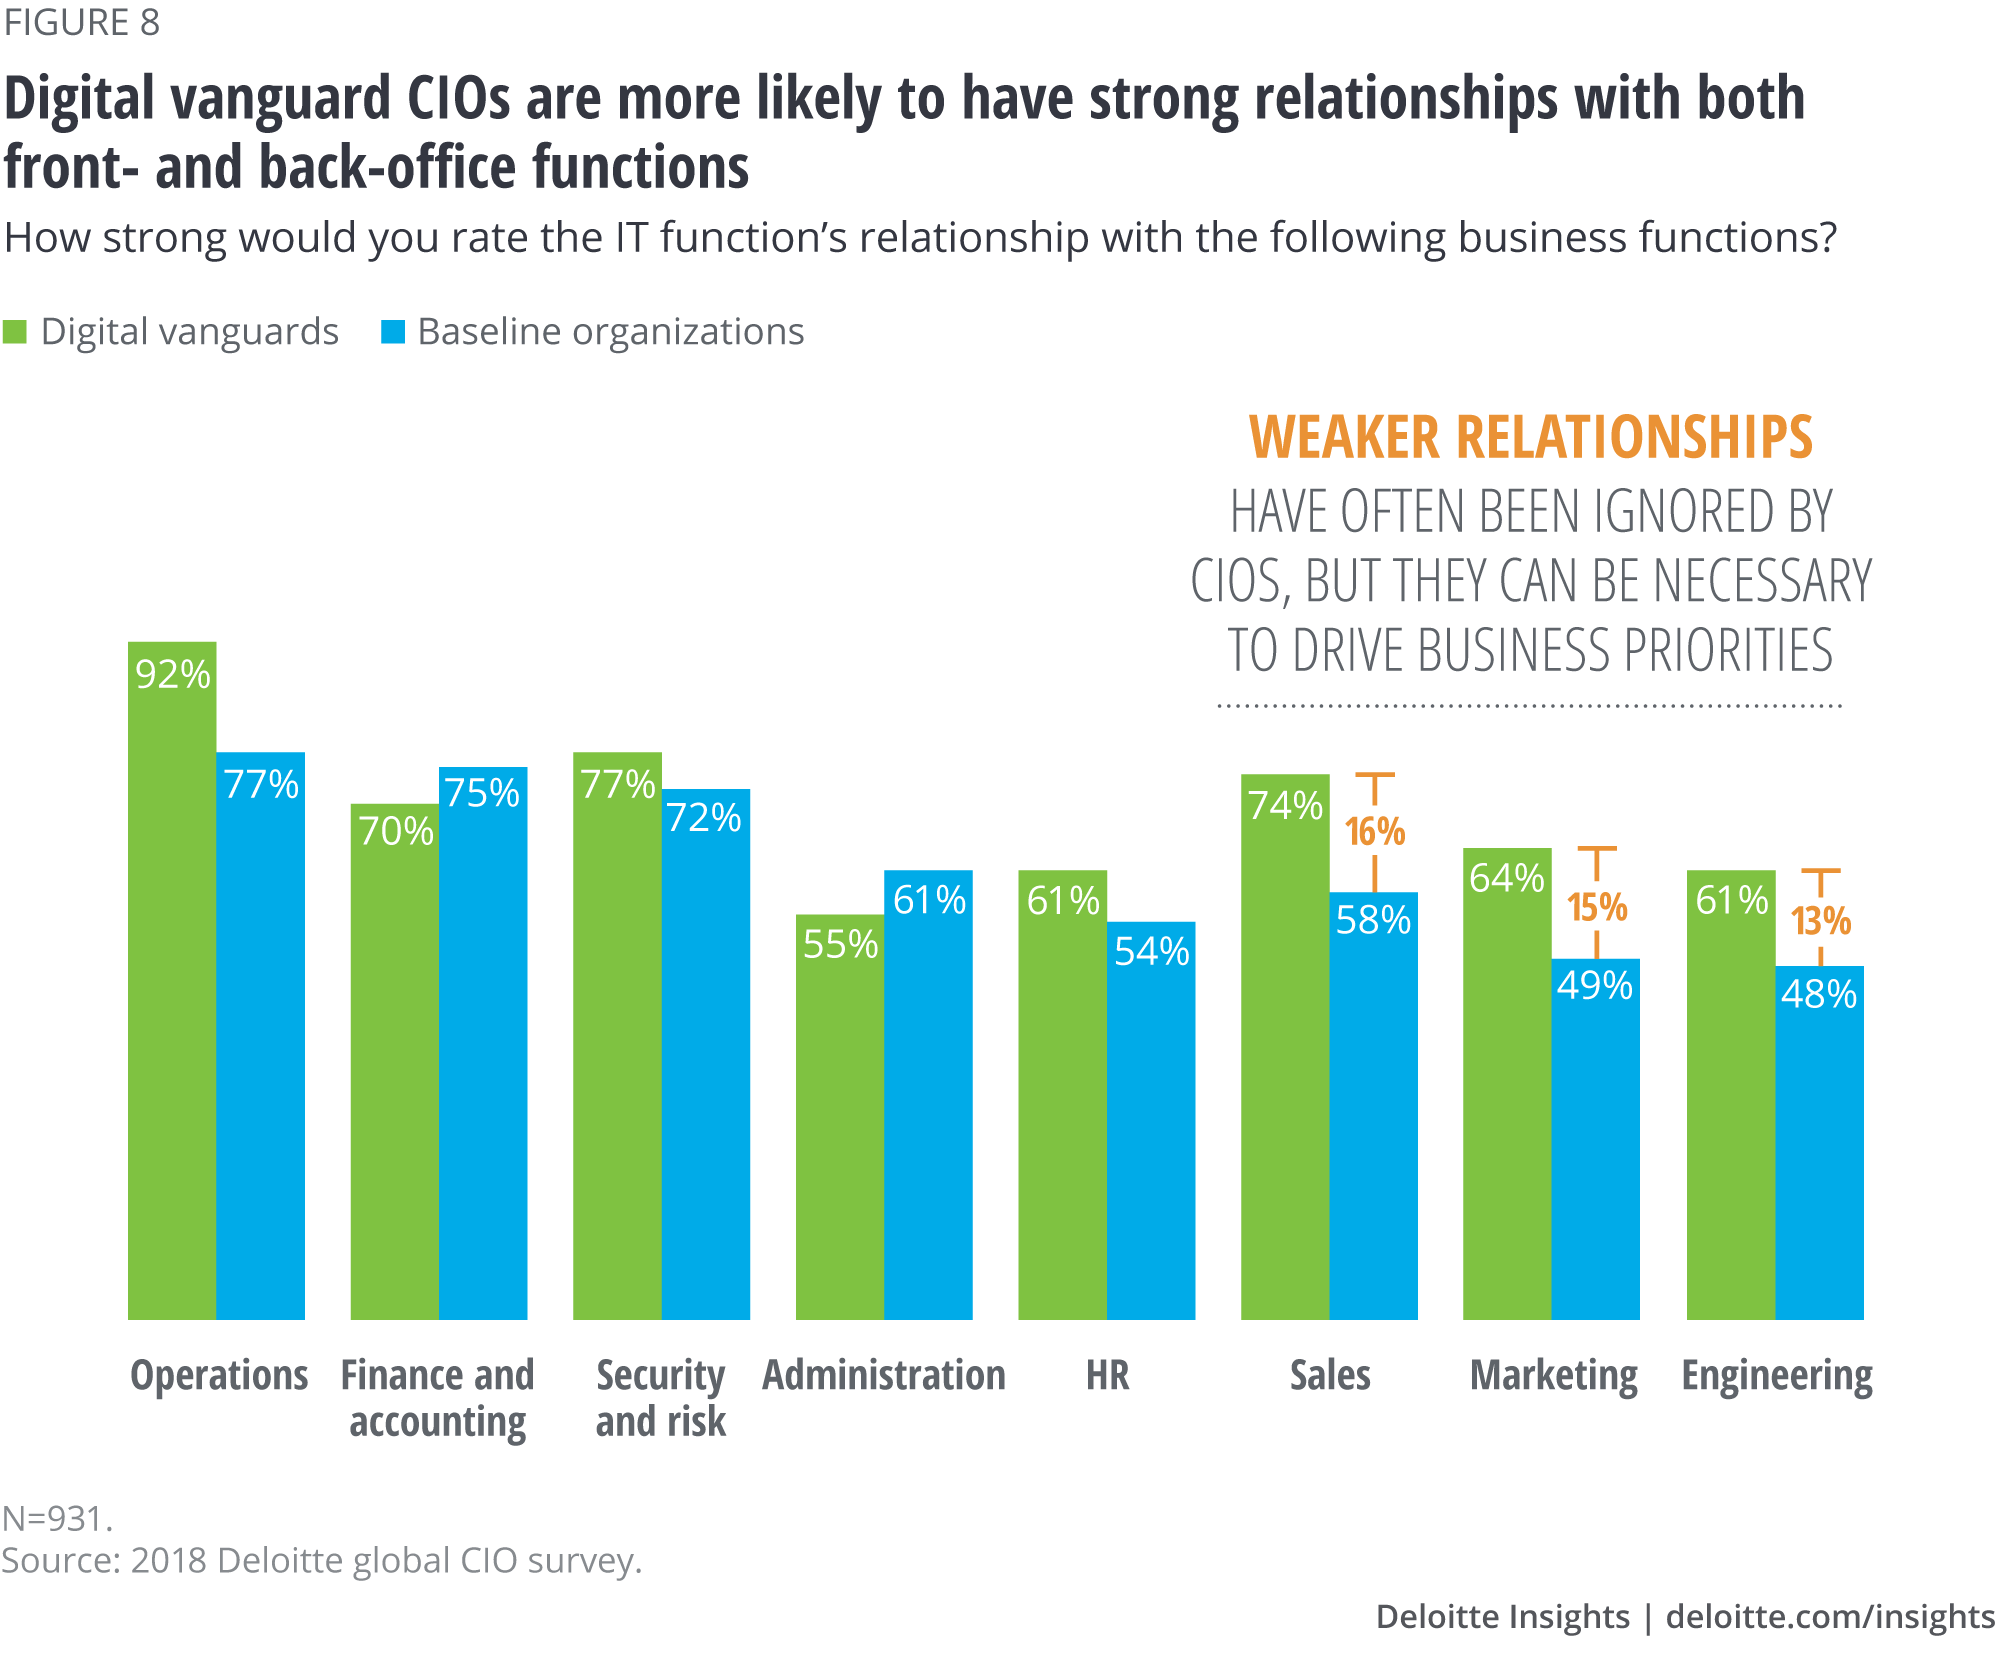 Digital vanguard CIOs are more likely to have strong relationships with both front- and back-office functions